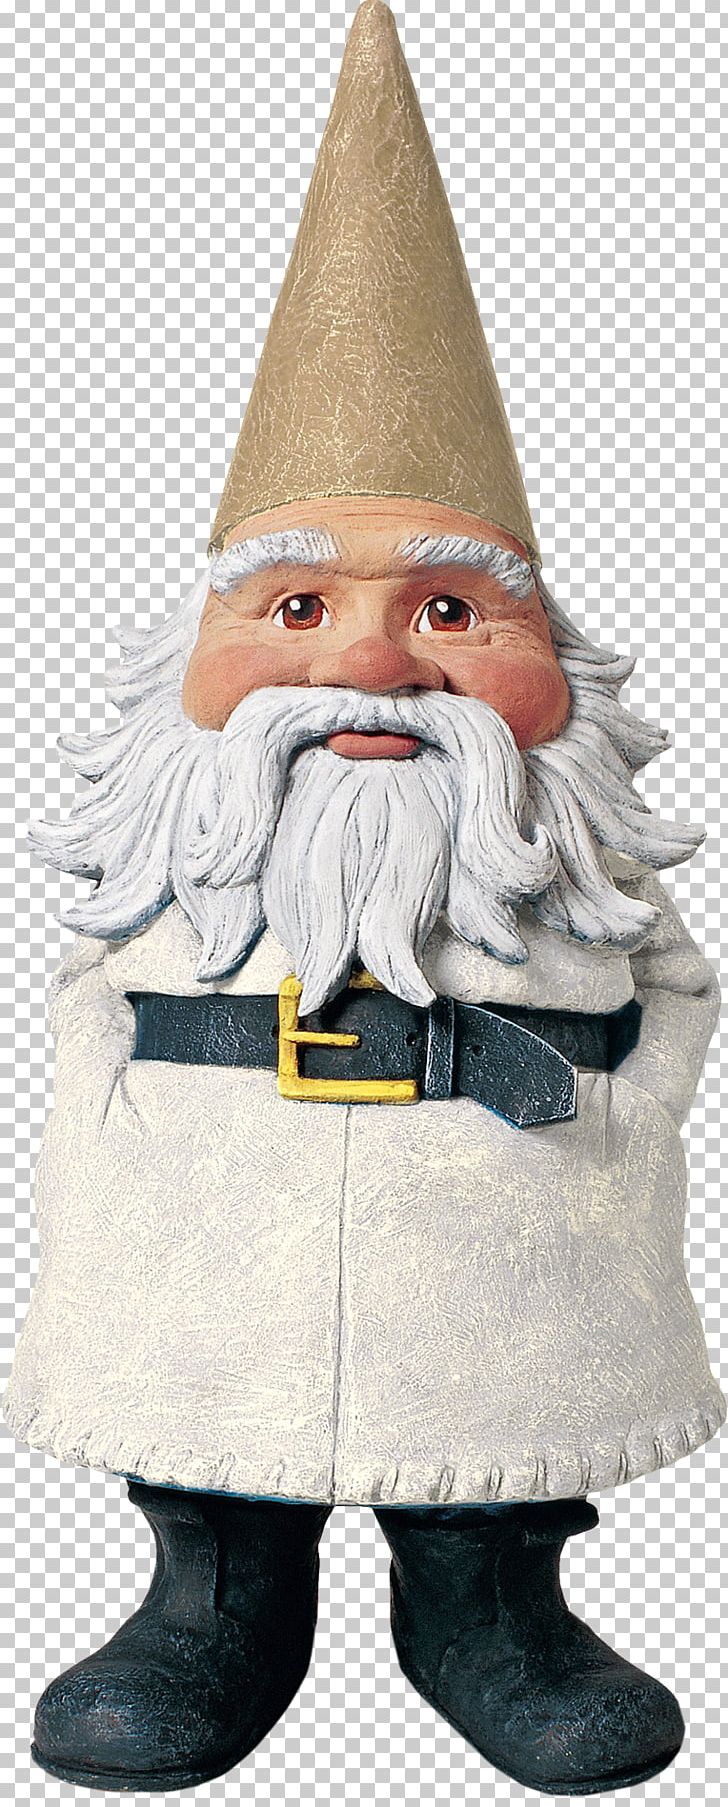 Santa Claus Garden Gnome Where Is My Gnome? Travelocity PNG, Clipart, Adobe Illustrator, Claus, Cute, Cute Animal, Cute Animals Free PNG Download